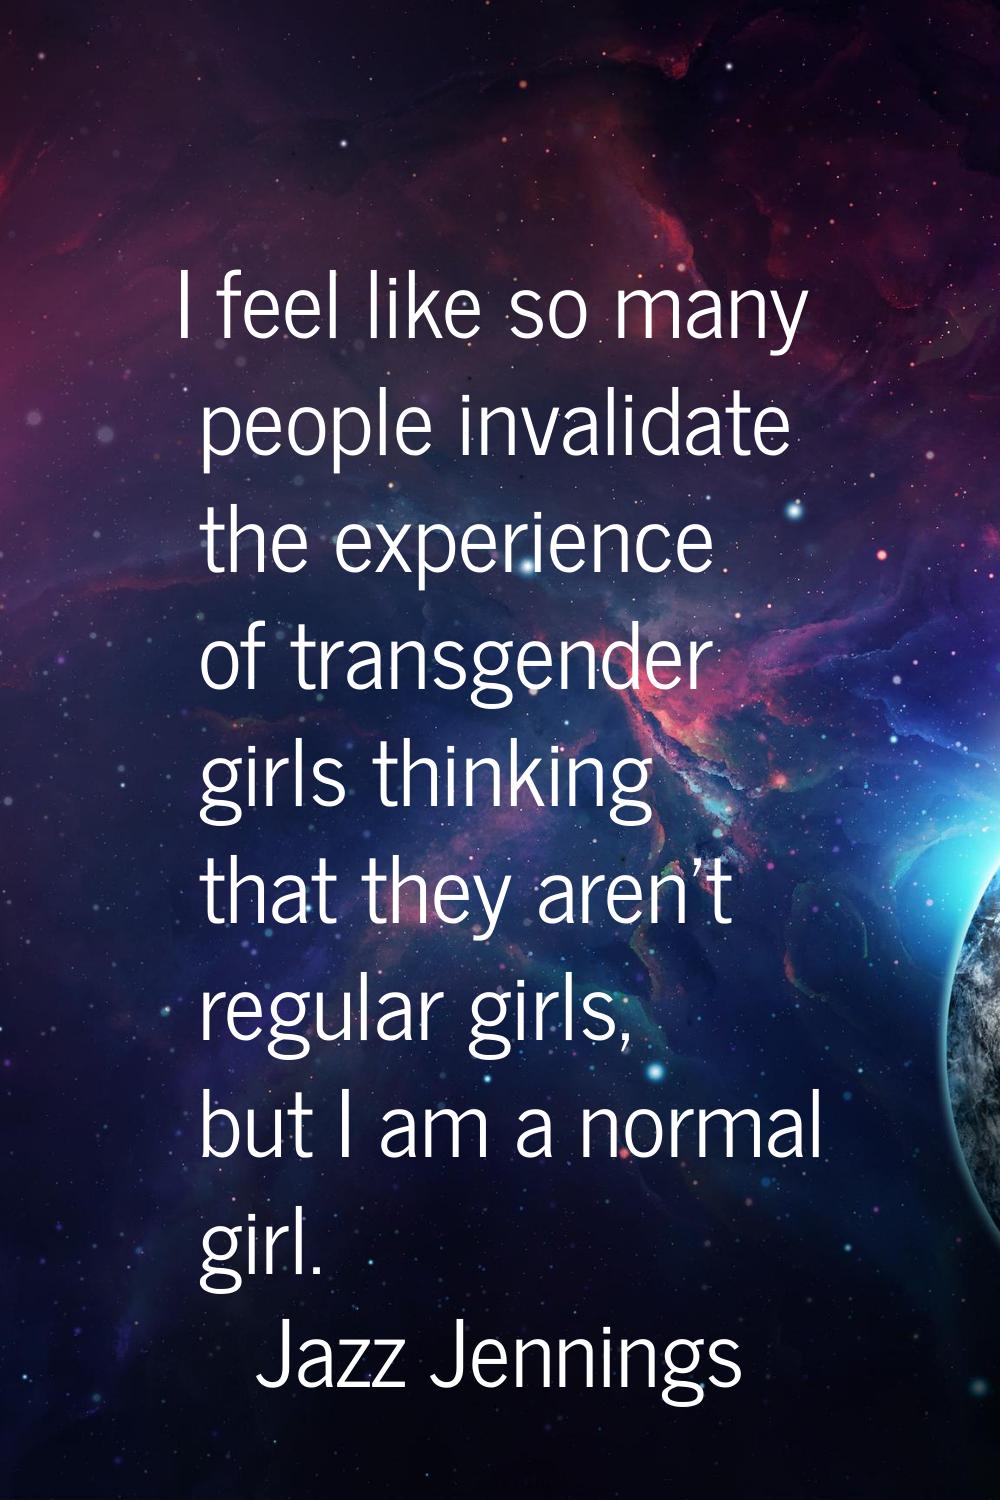 I feel like so many people invalidate the experience of transgender girls thinking that they aren't